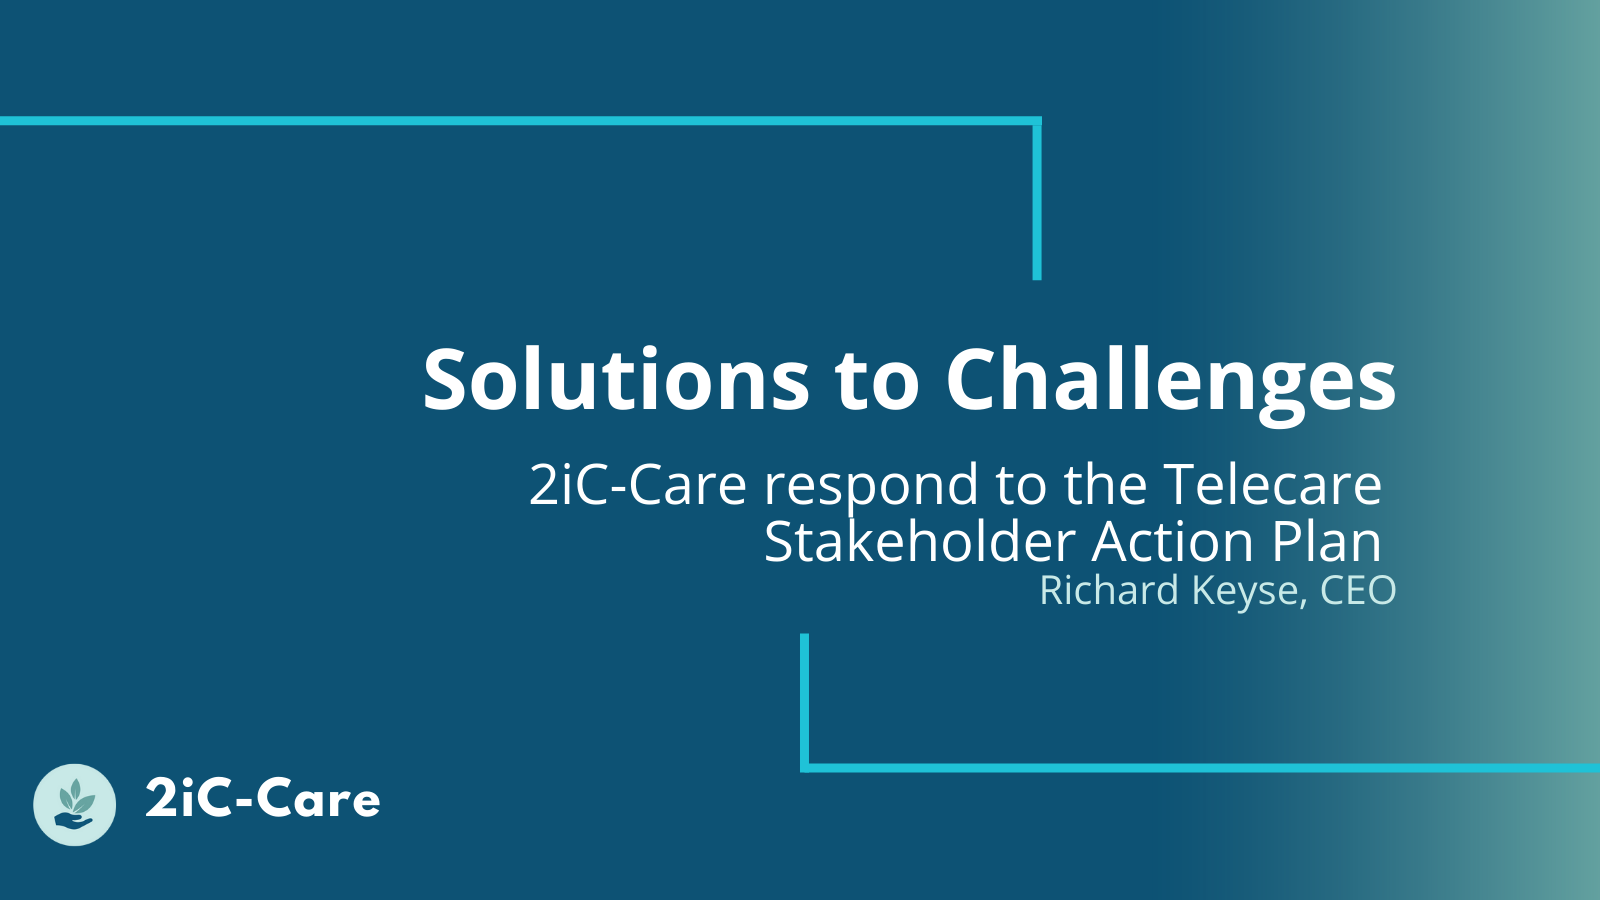 Solutions to Challenges; 2iC-Care responds to the telecare action plan.